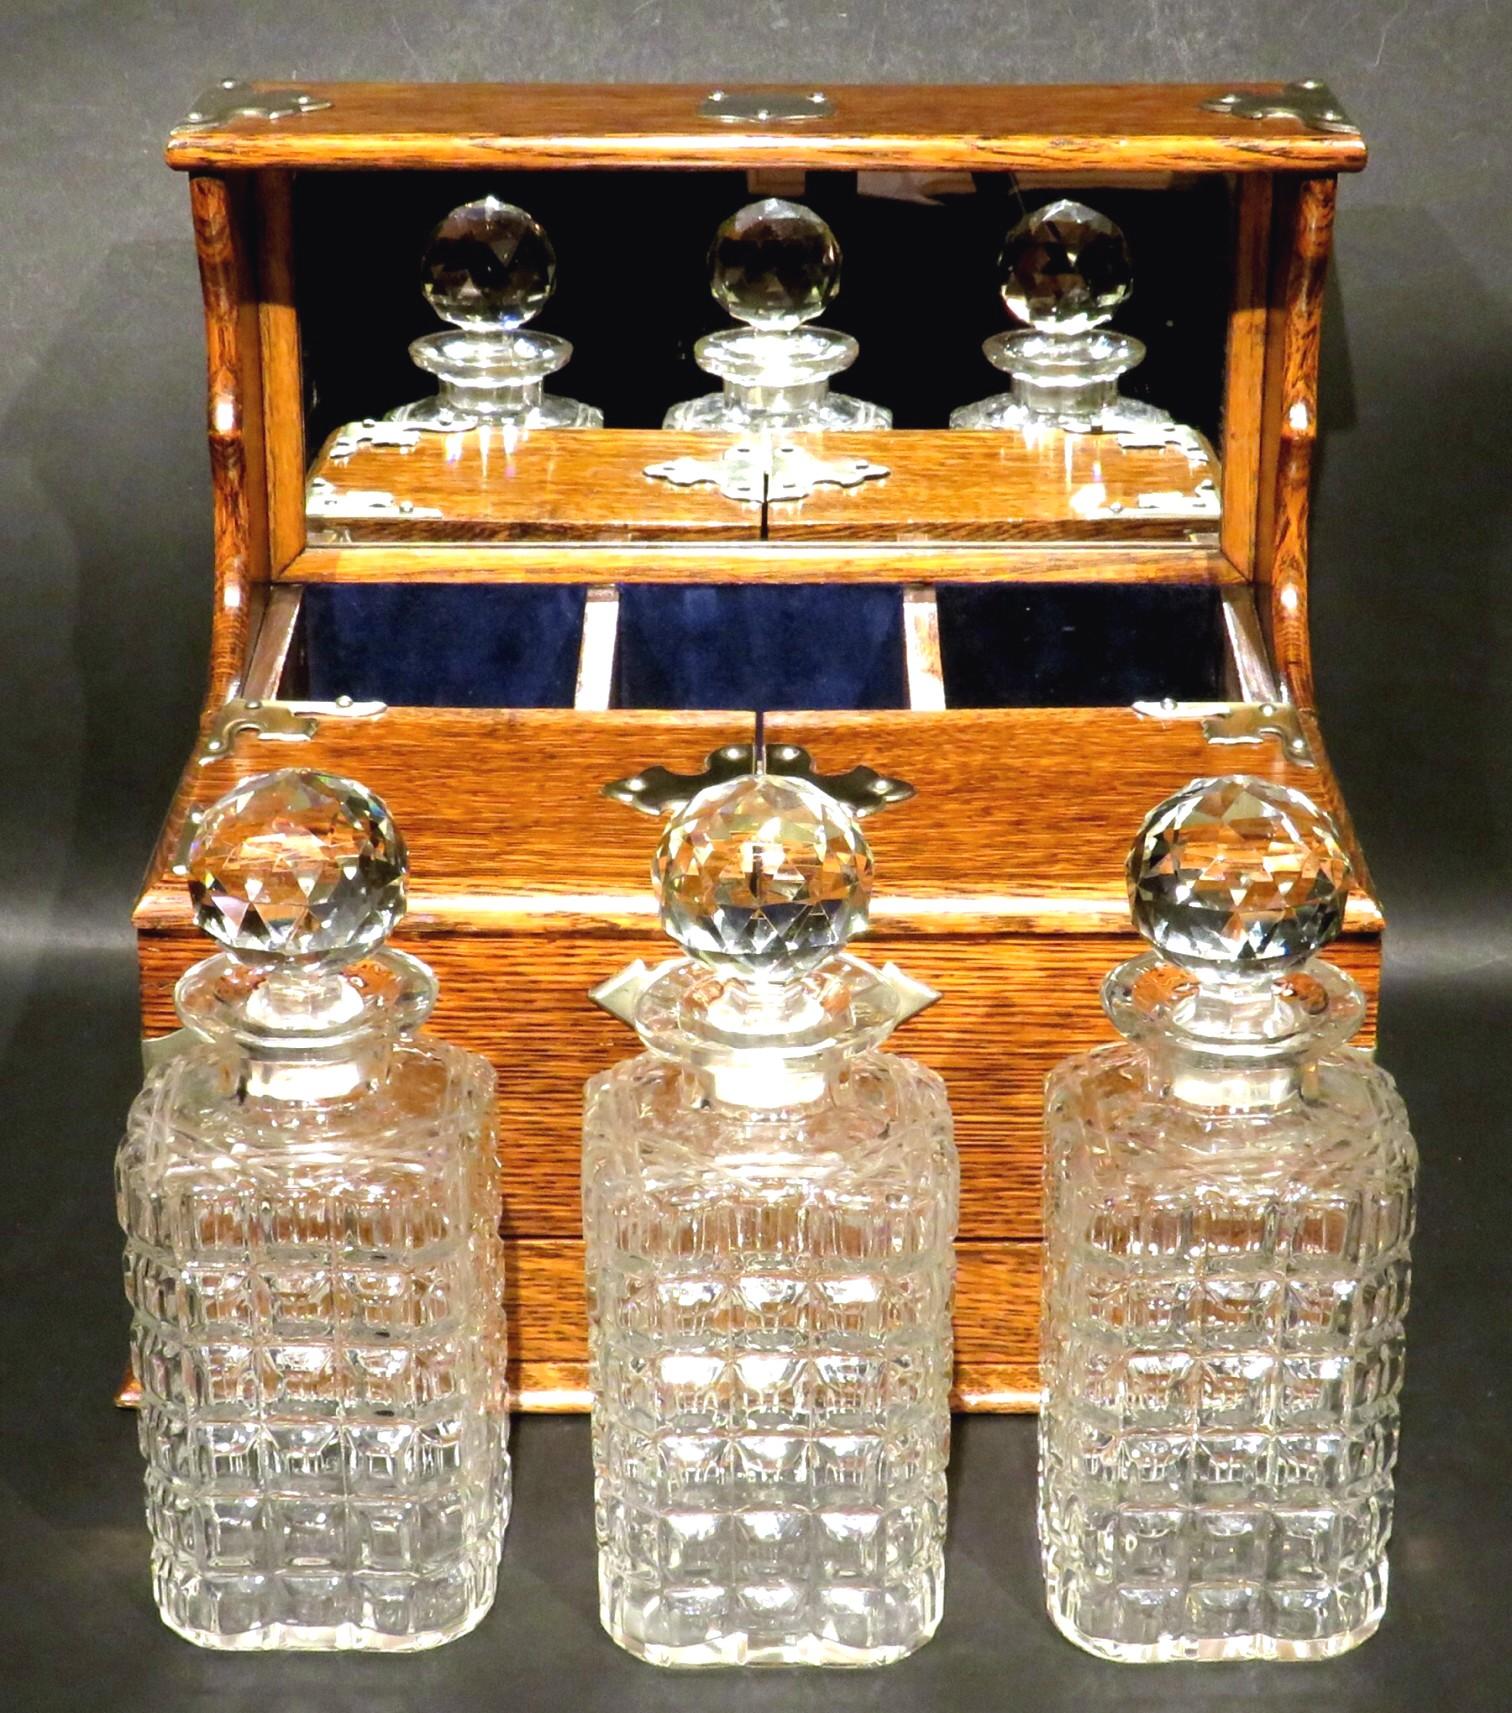 A Very Good Early 20th Century Oak & Silver Plated Tantalus, U.K. Circa 1910 For Sale 3